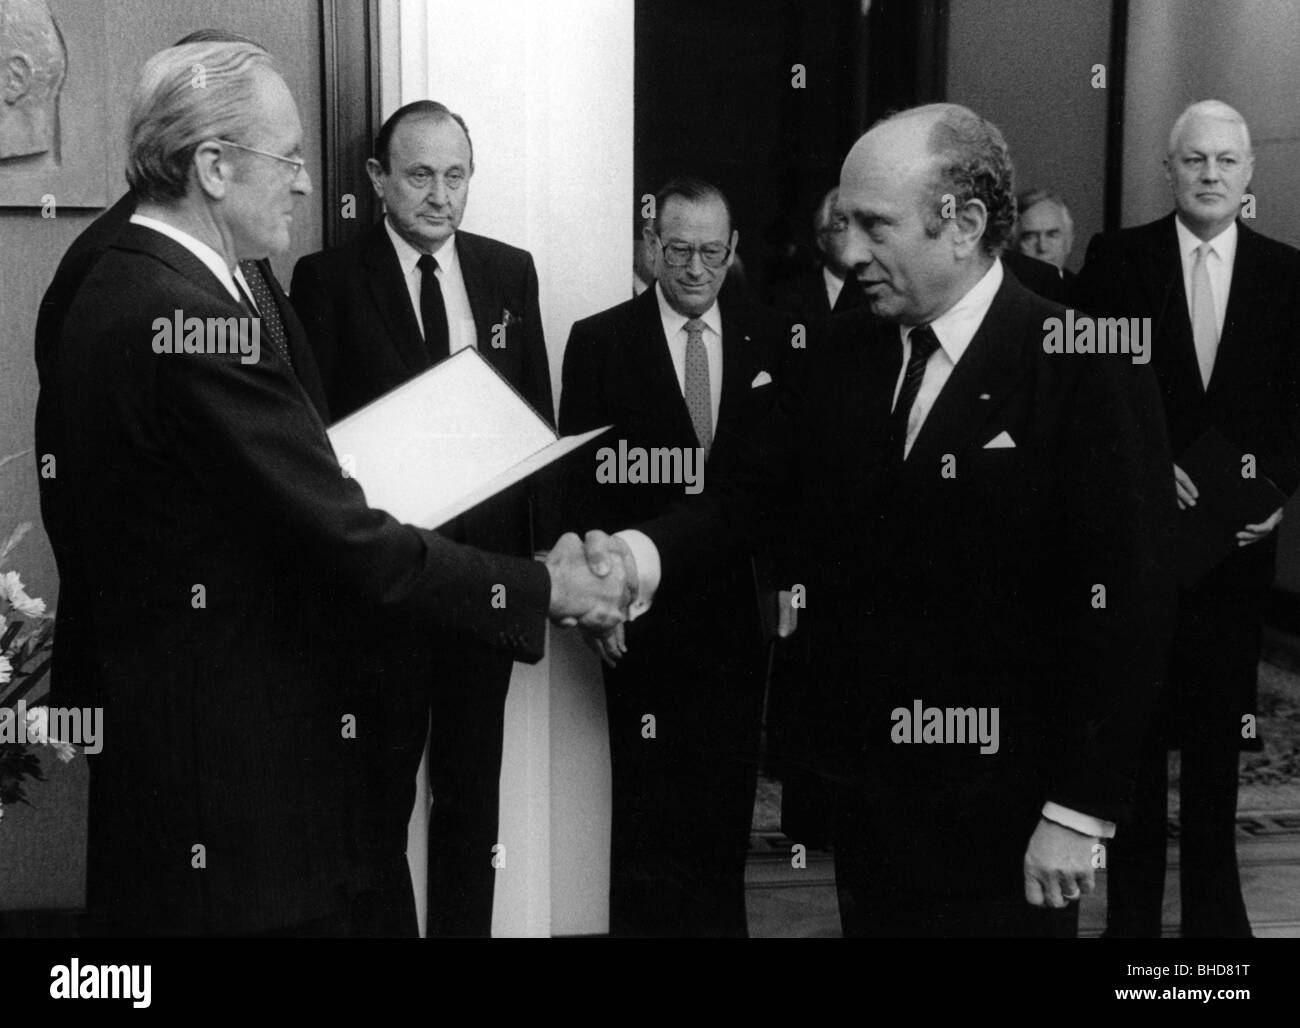 Lambsdorff, Otto Graf von, 20.12.1926 - 5.12.2009, German politician (FDP), receiving his letter of appointment as Minister for Economics from the President of Germany, Karl Carstens, Bonn, Germany, 4.10.1982, Stock Photo